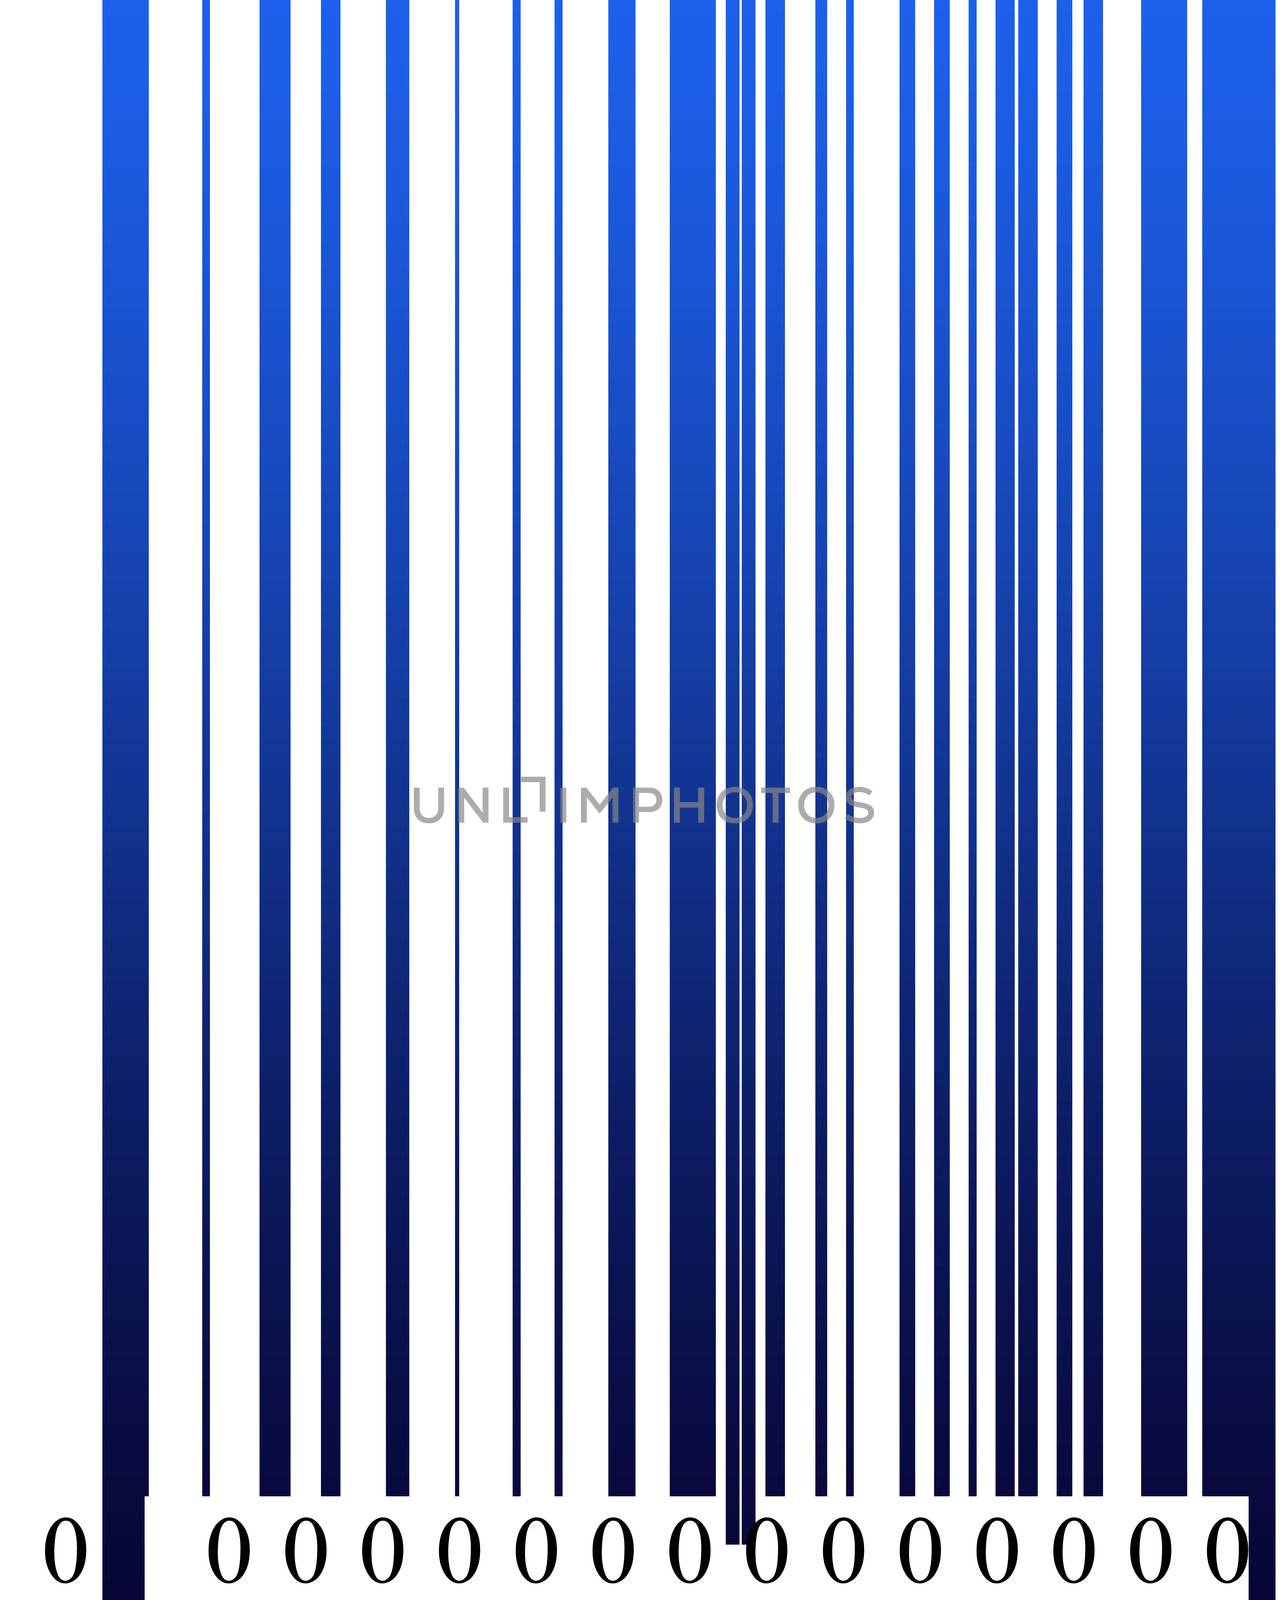 Barcode in digital format high resolution with all zero numbers.